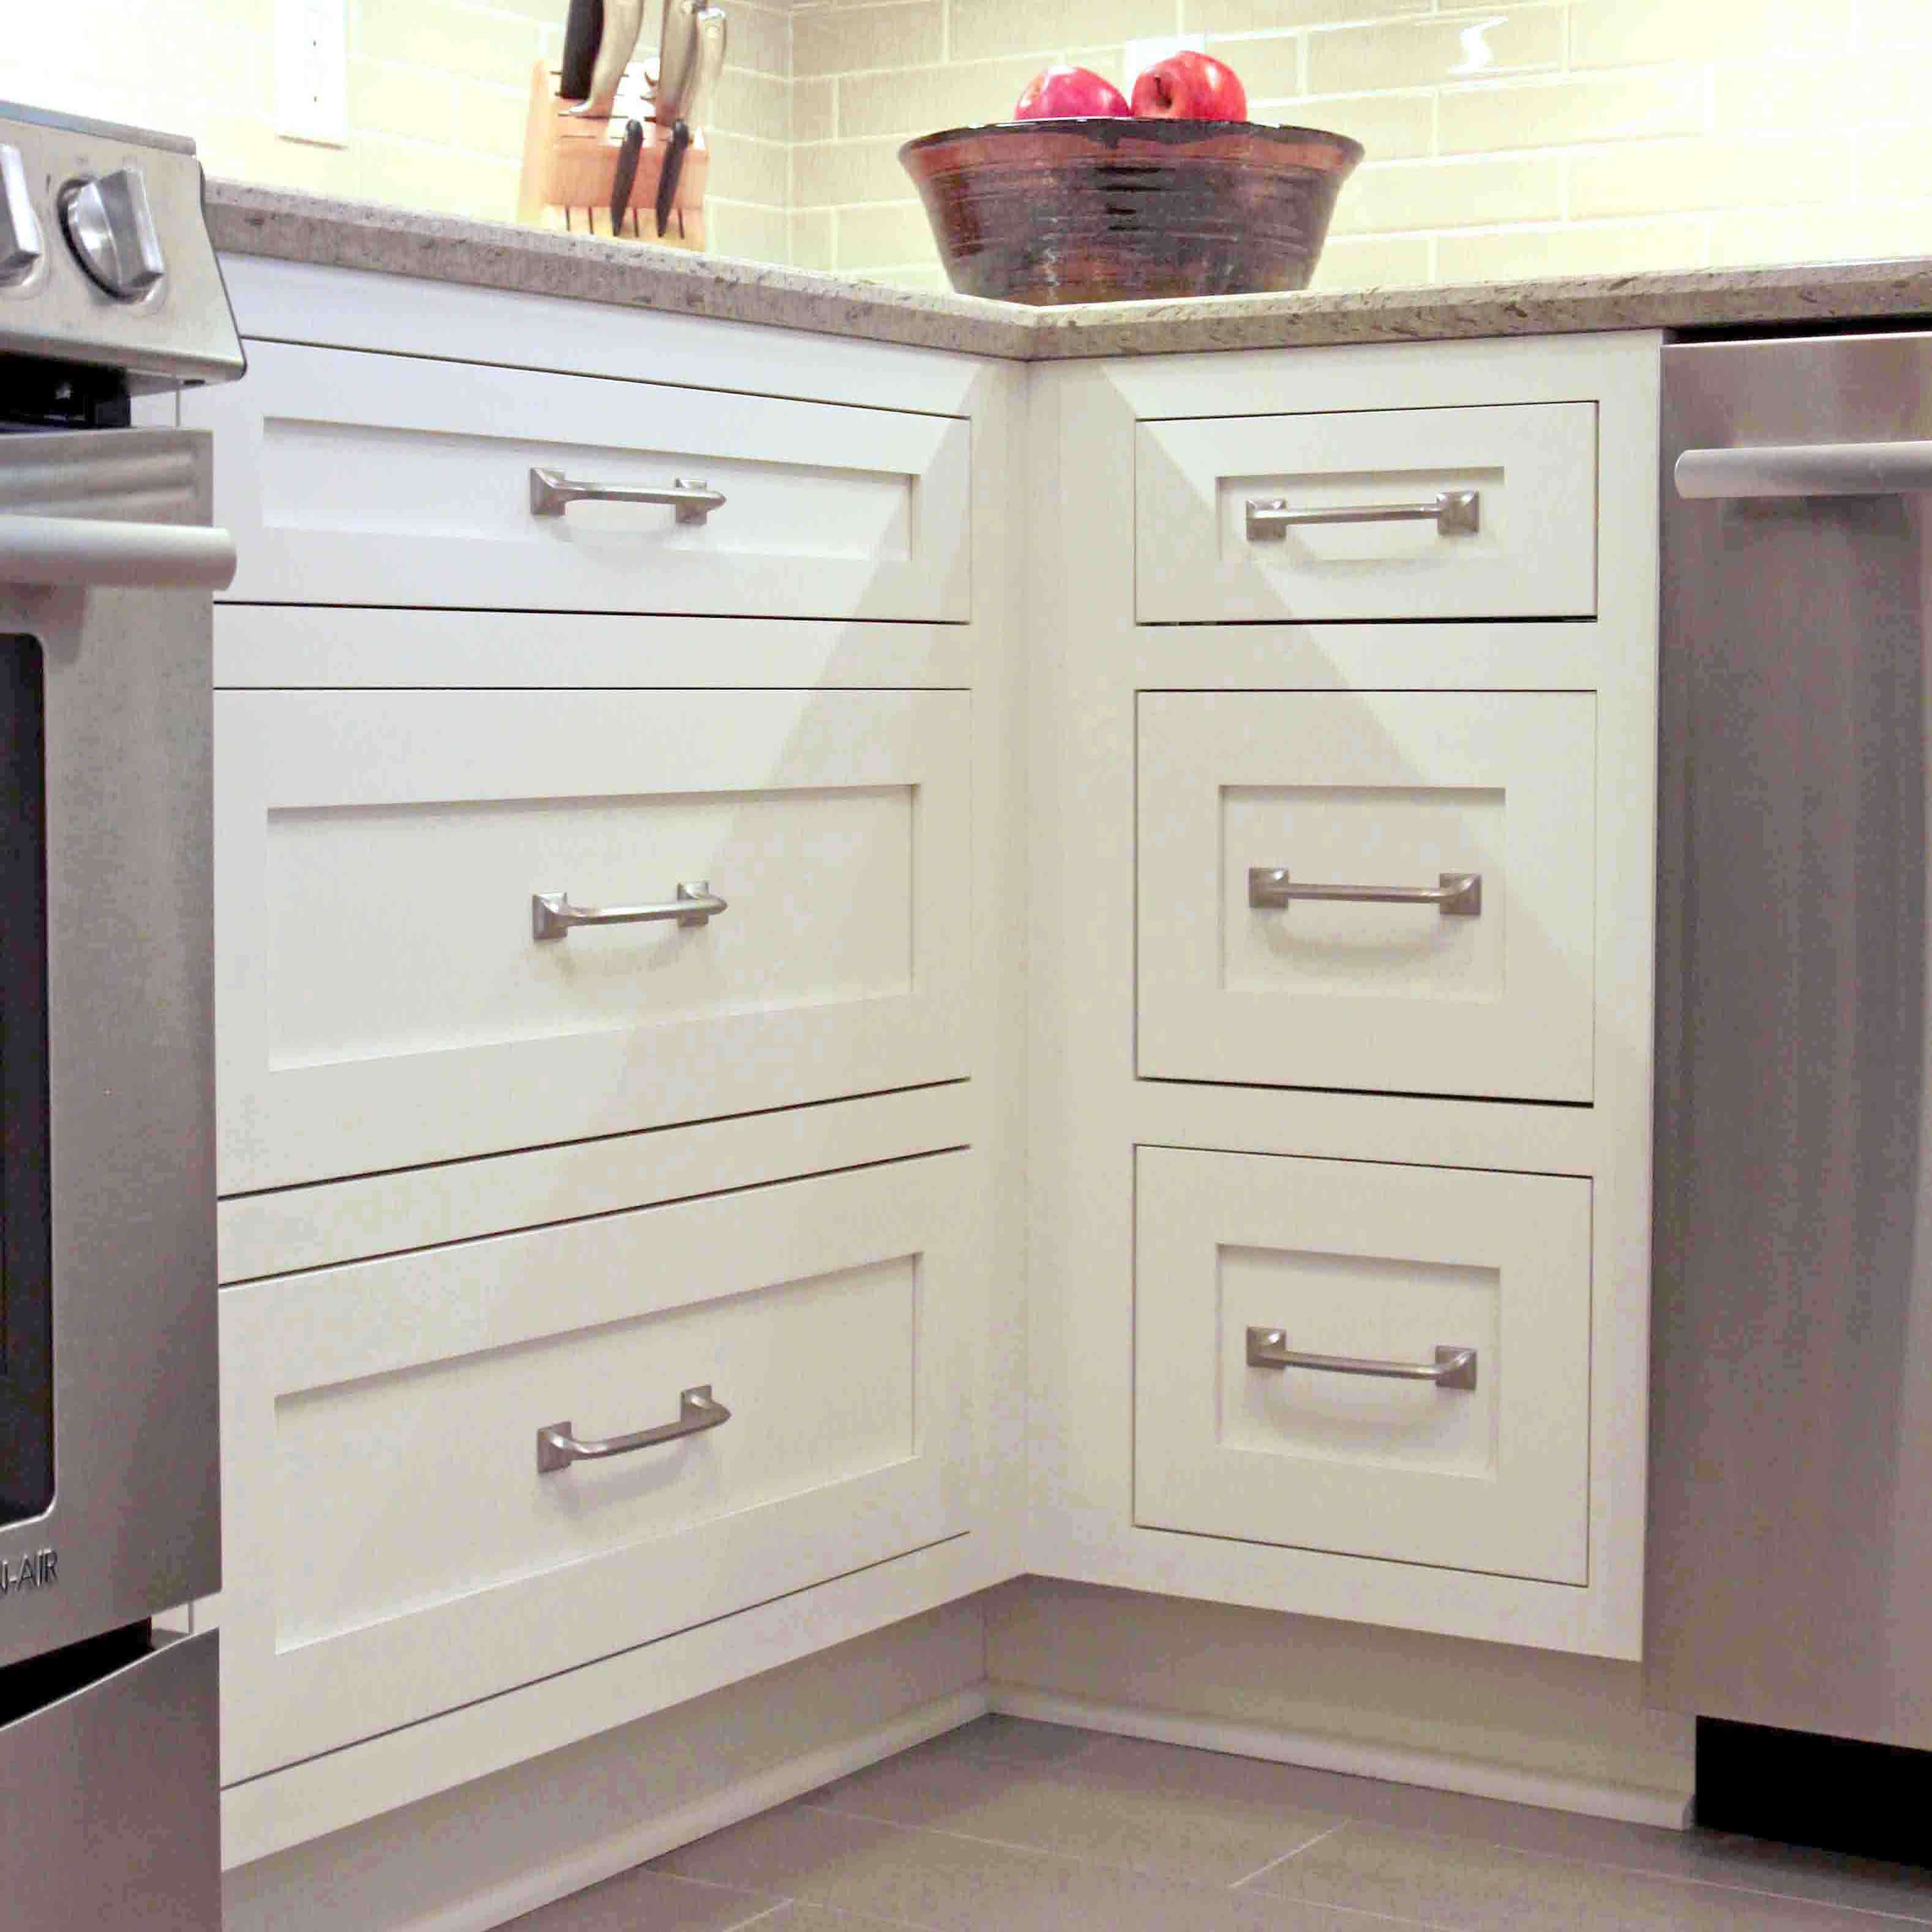 A voided corner in a kitchen design with drawers on each side.